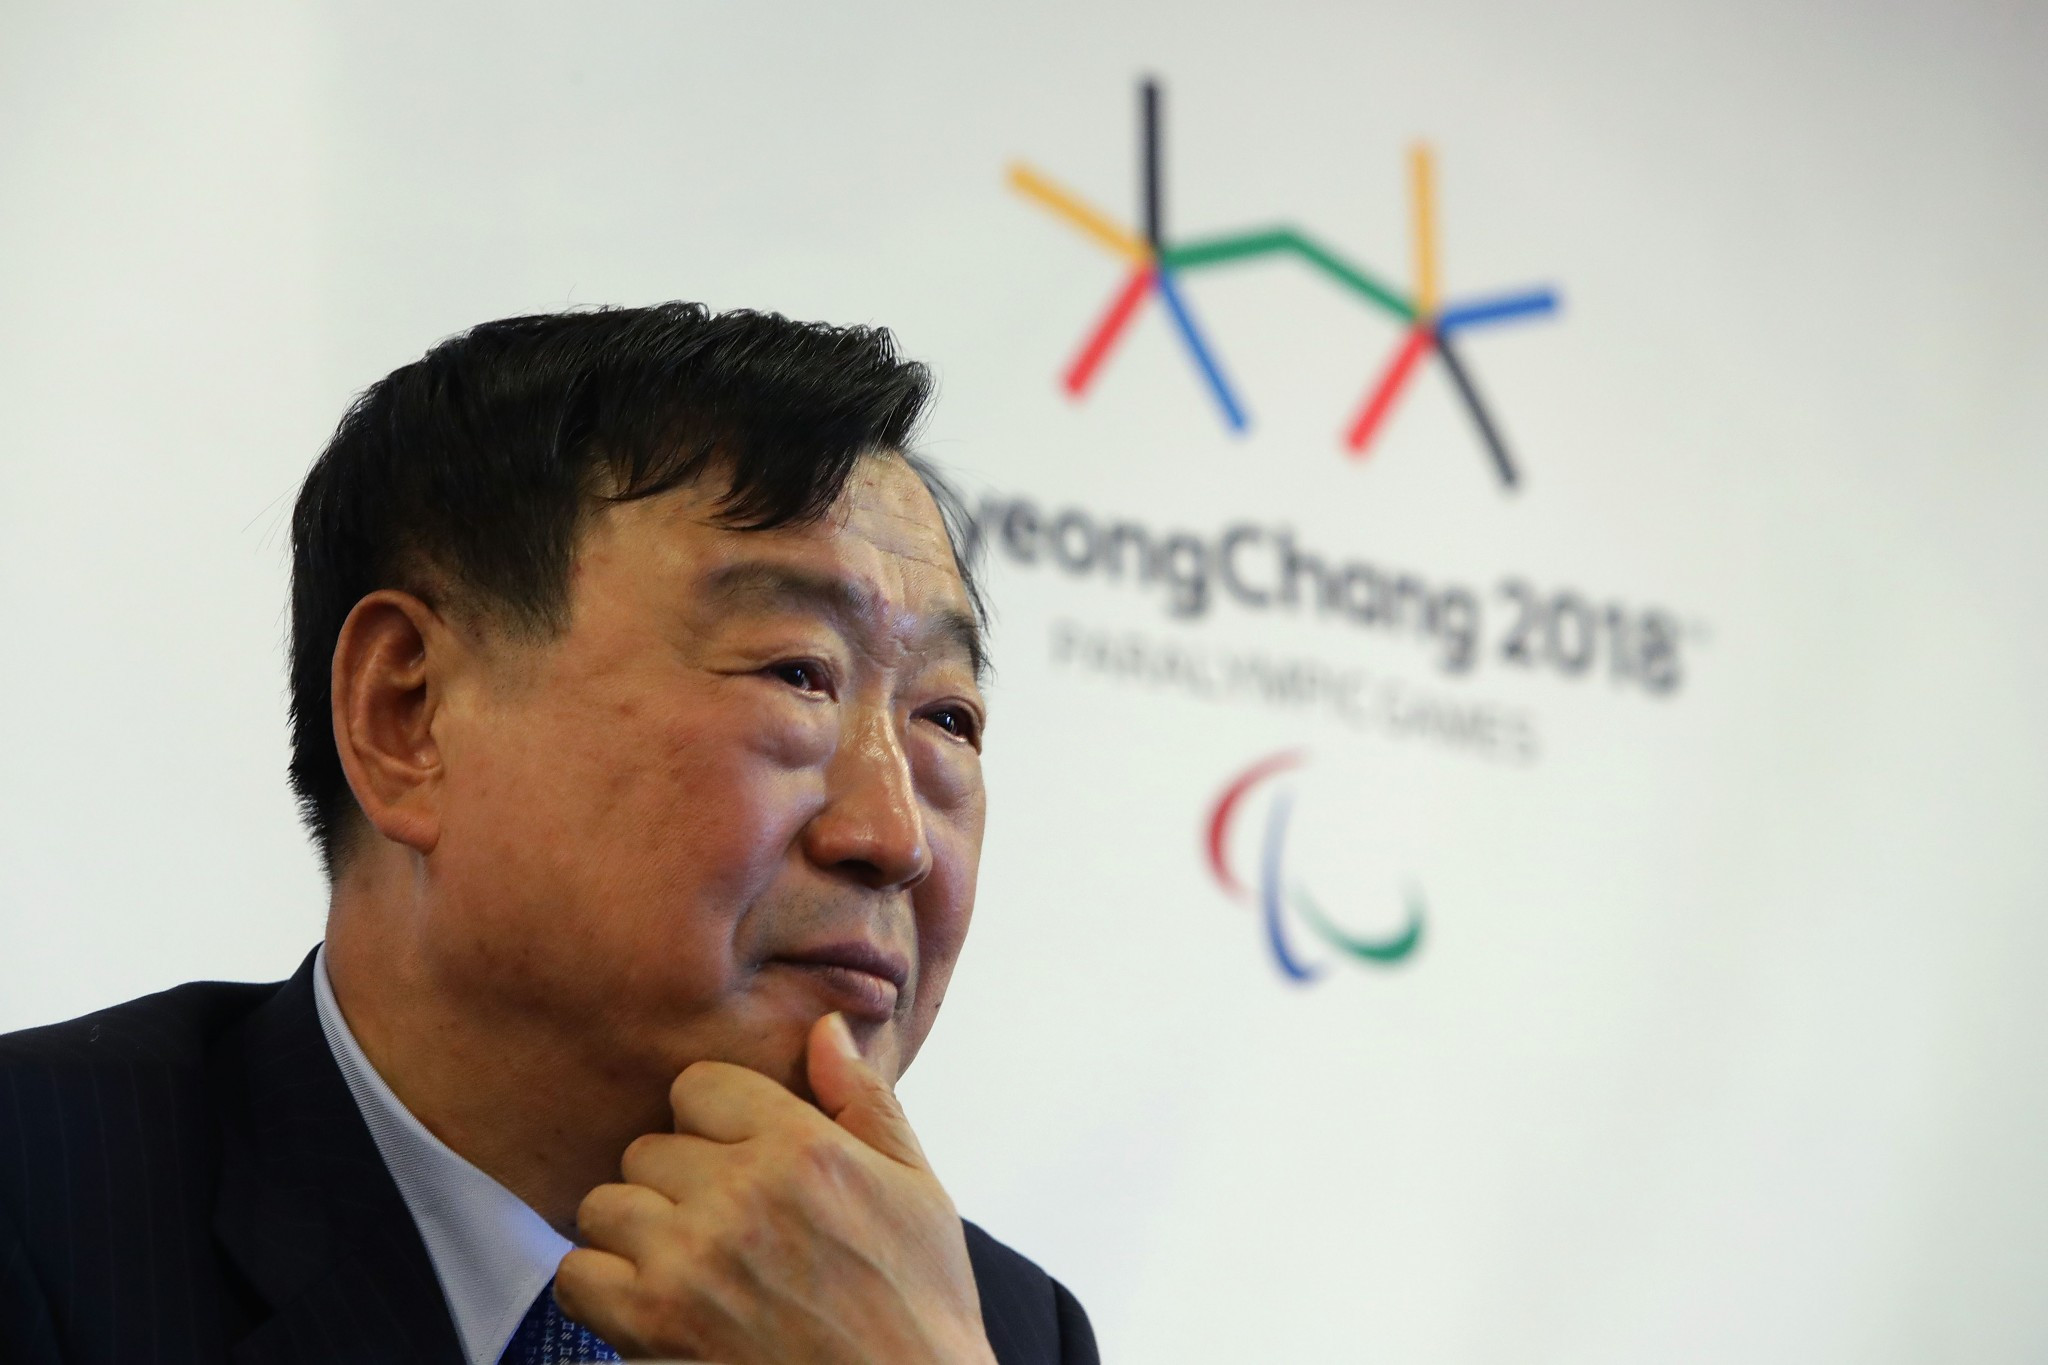 Four new events added to 2018 Winter Olympic Games lineup, says IOC